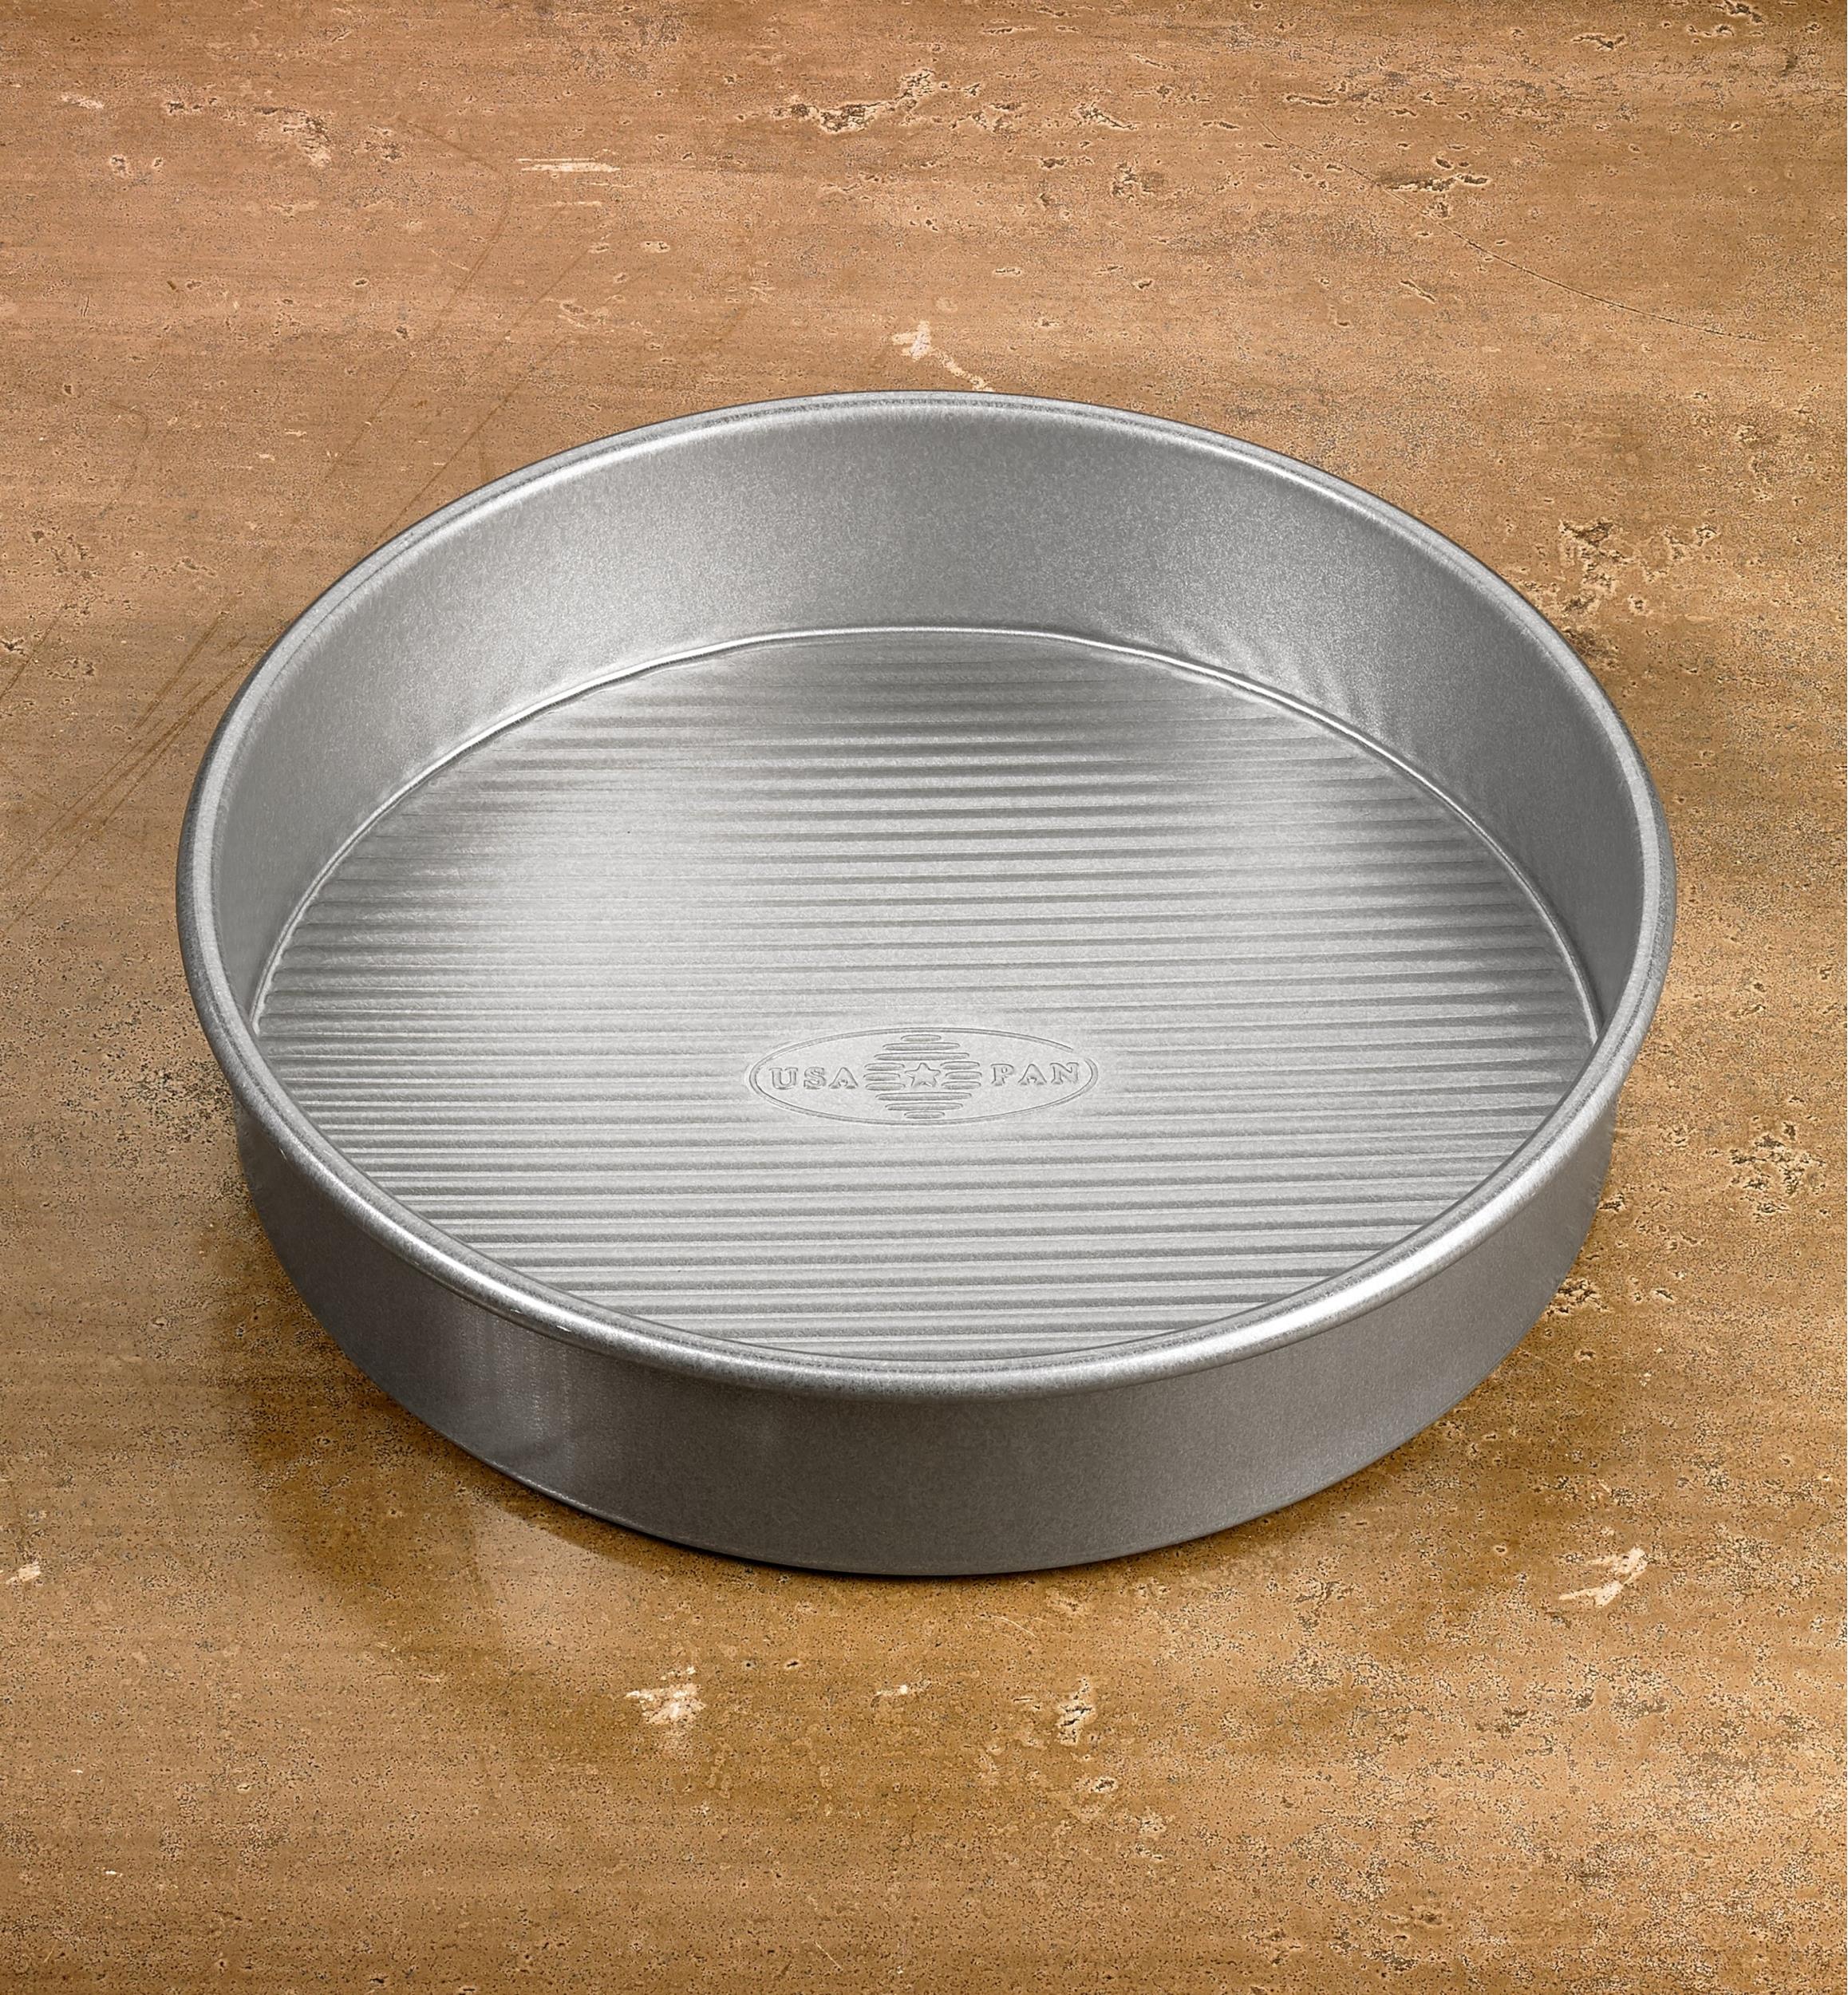 Range Kleen 9 in. Round Non-Stick Cake Pan at Tractor Supply Co.